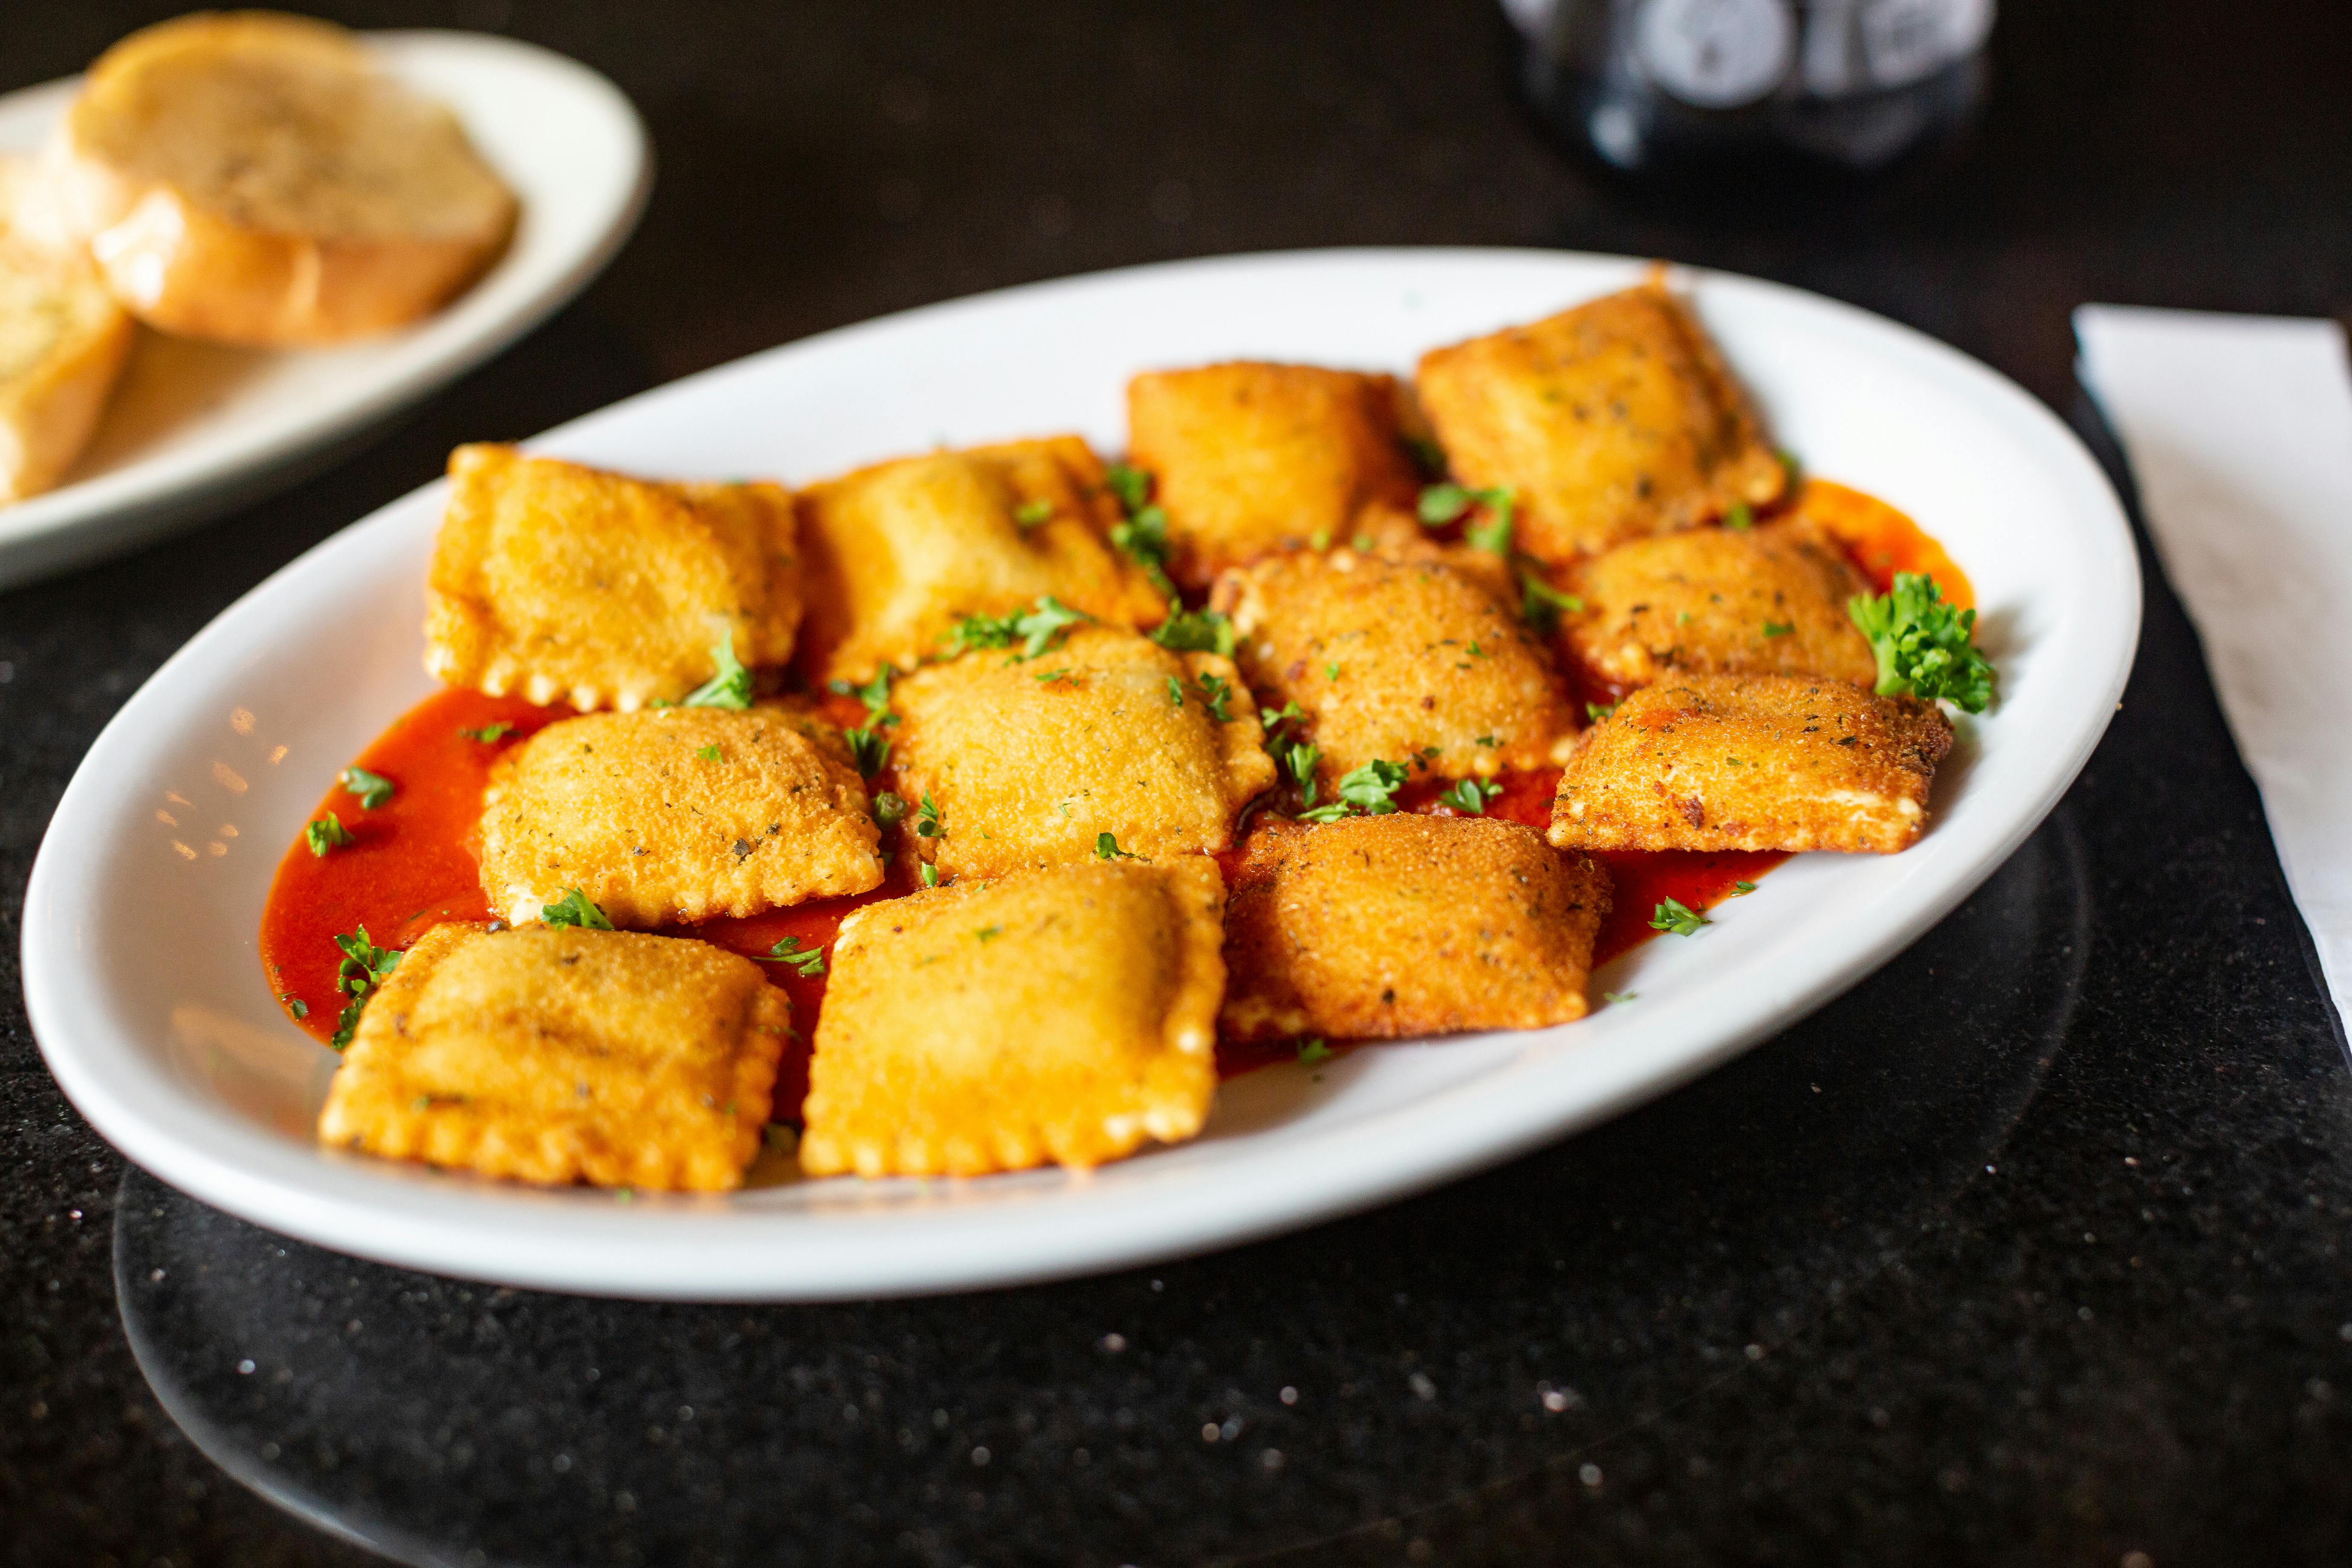 Toasted Ravioli Duo from The Mad Greek in Lawrence, KS